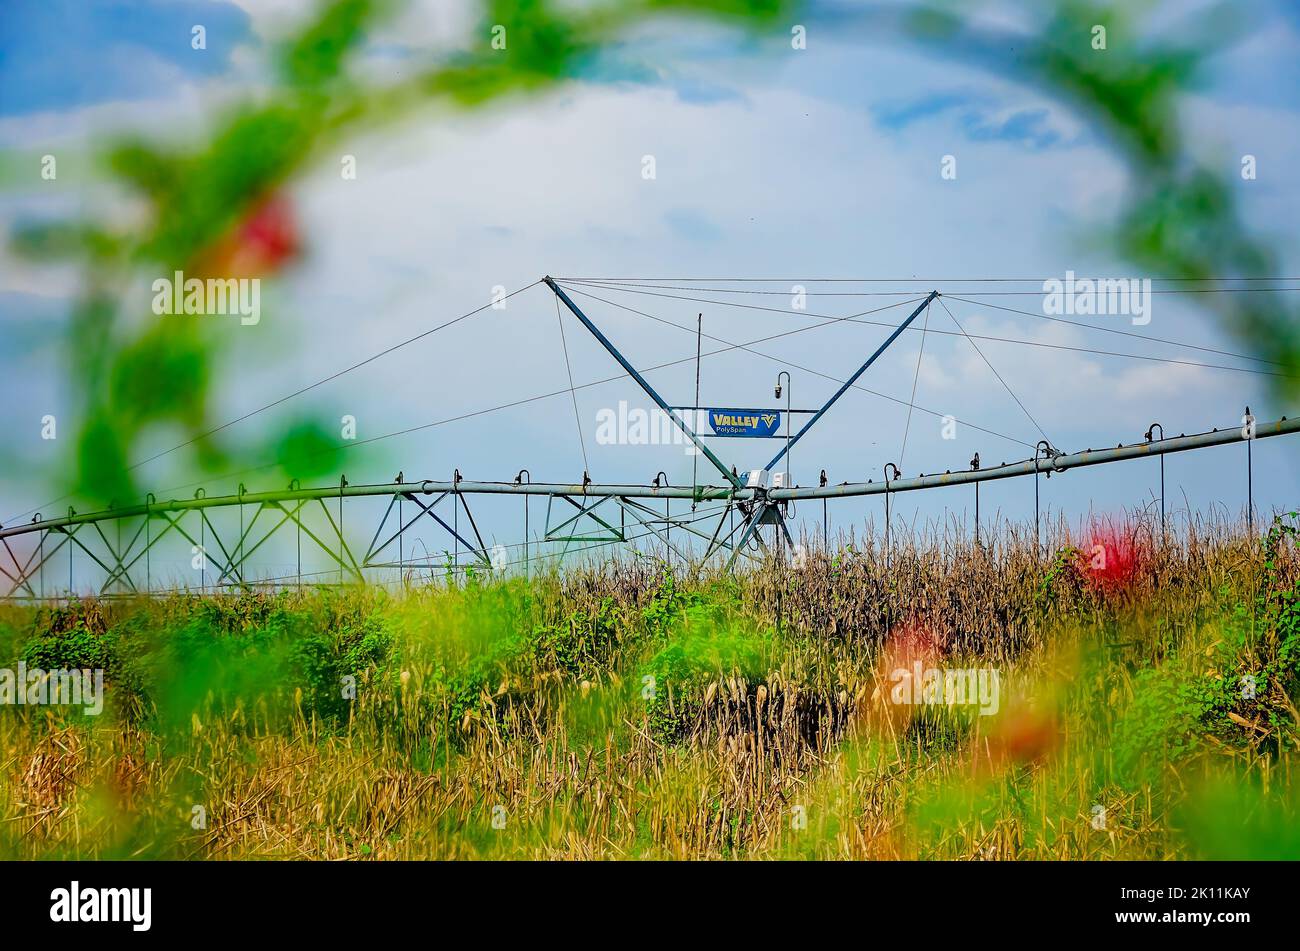 A crop irrigation system stands in a field, Sept. 8, 2022, in Fairhope, Alabama. Baldwin County is home to more than 800 farms. Stock Photo